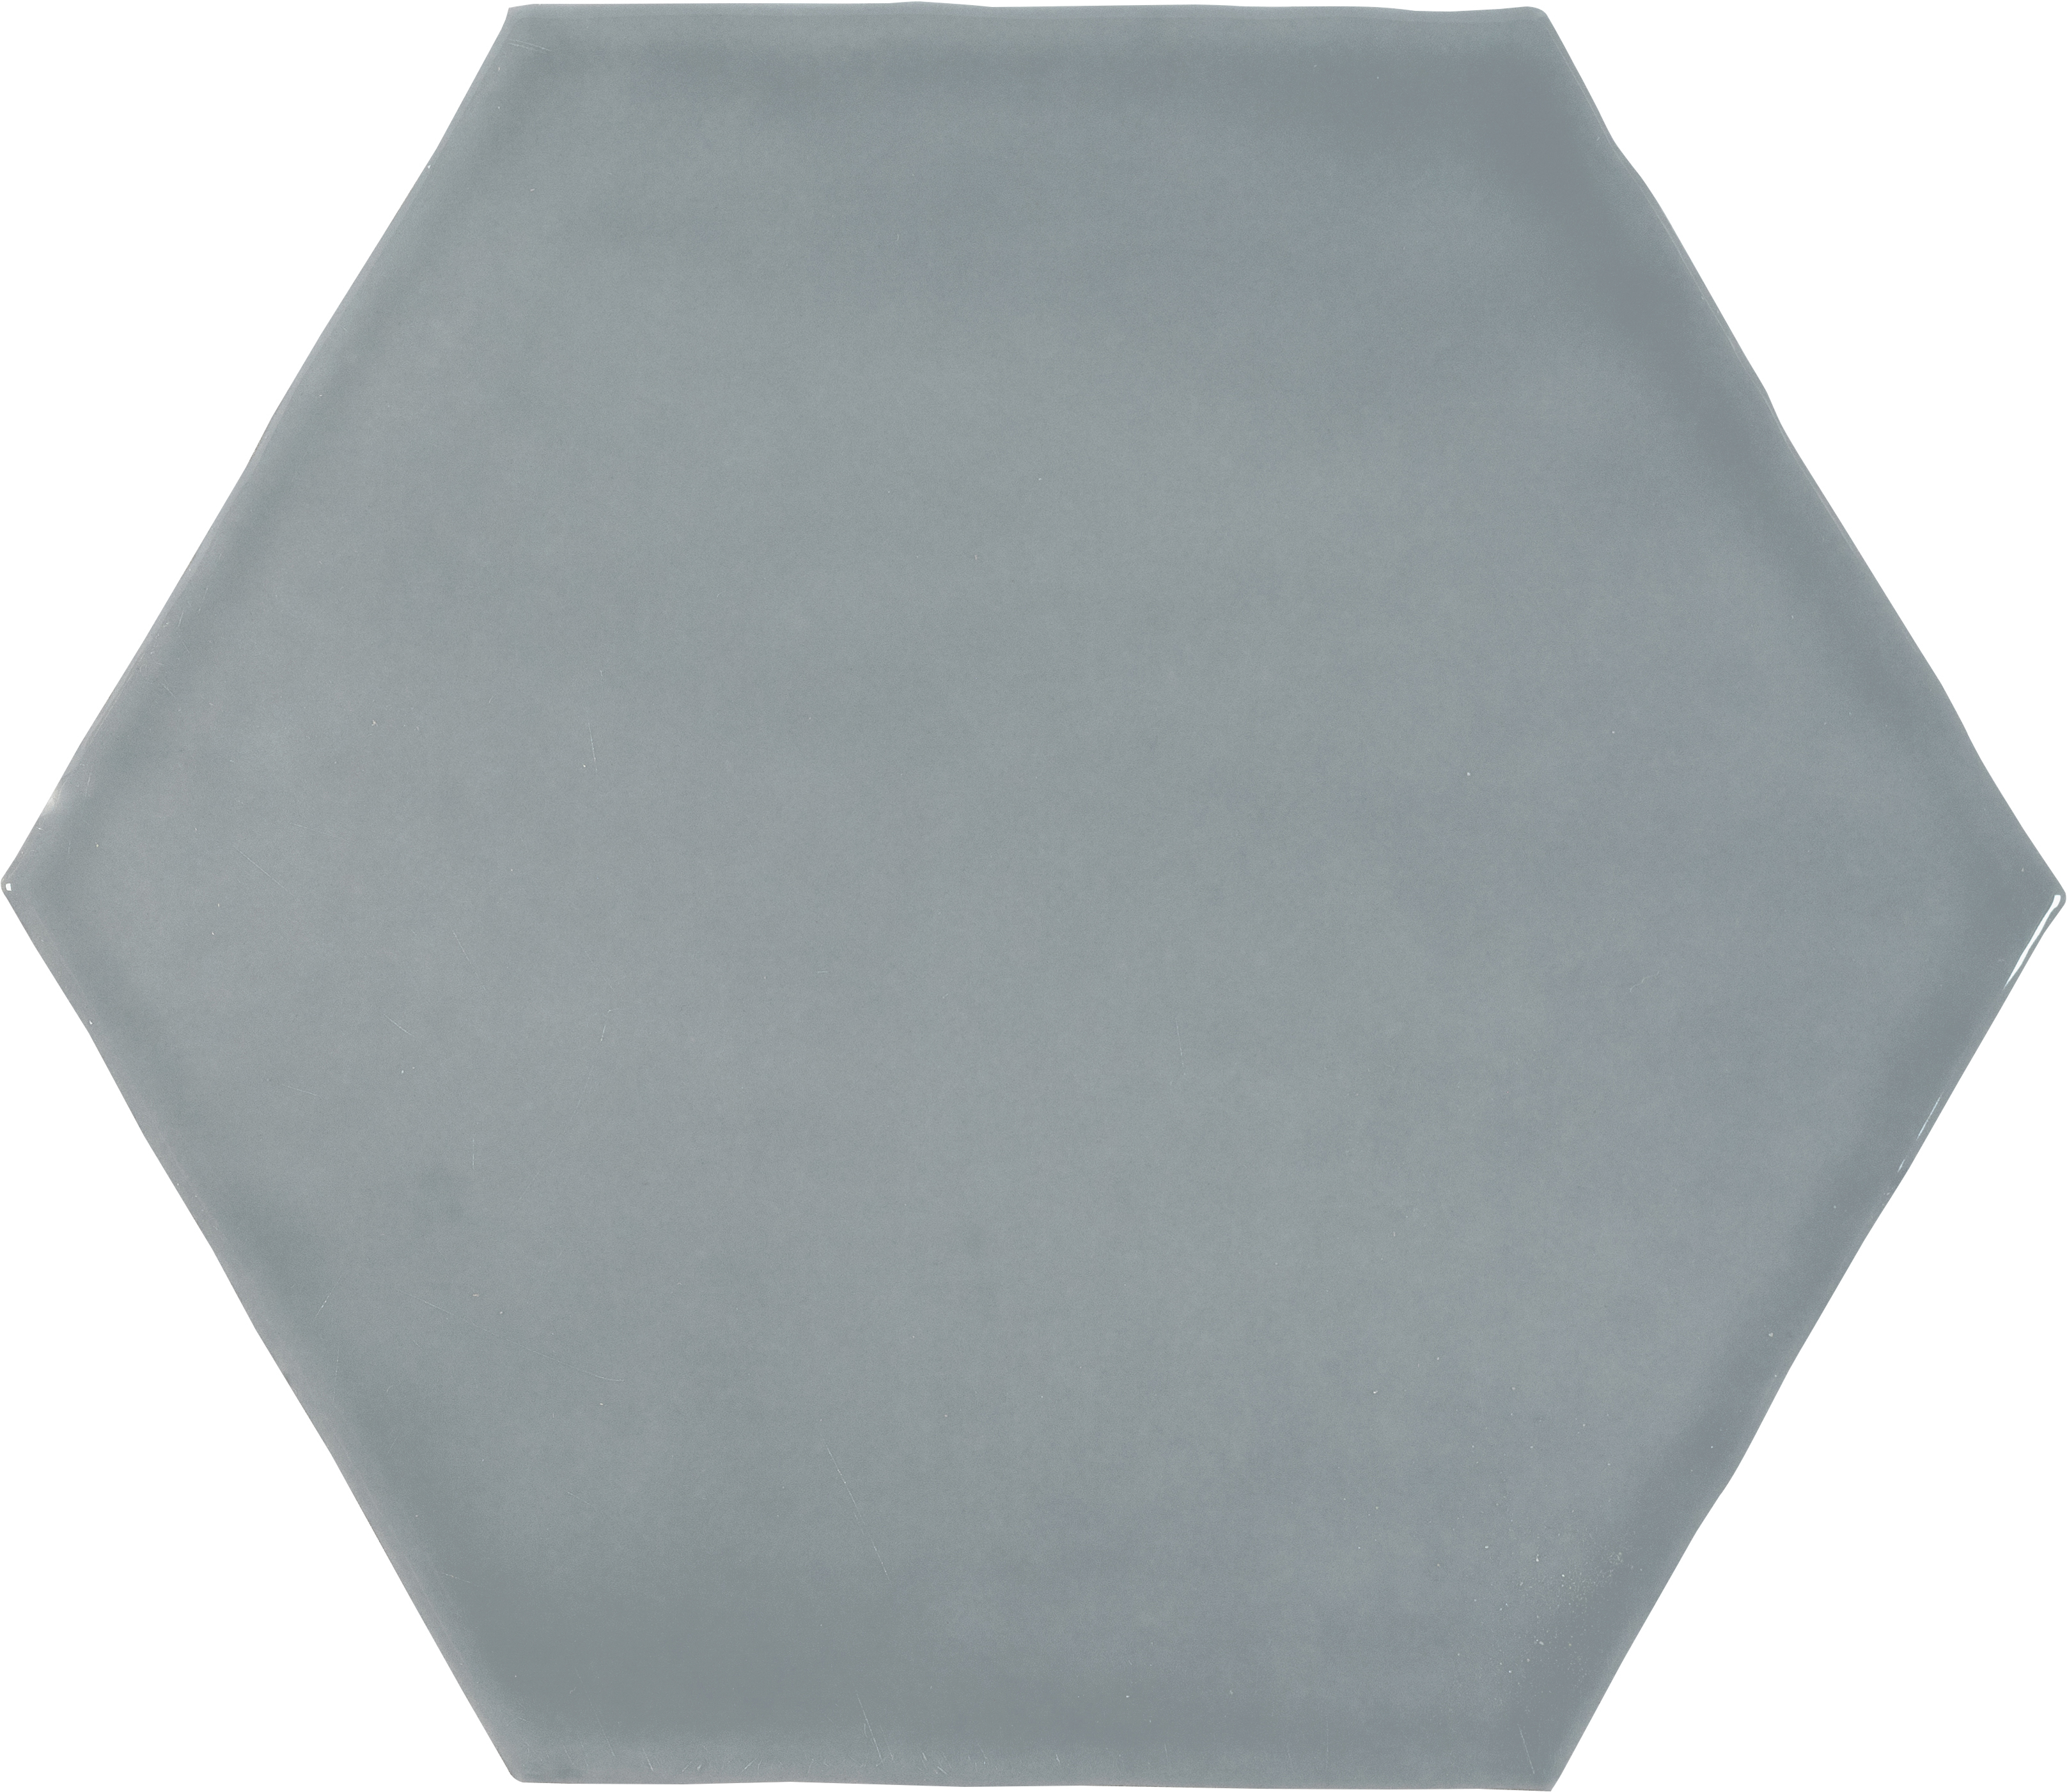 sterling pattern glazed ceramic field tile from teramoda anatolia collection distributed by surface group international glossy finish pressed edge 6-inch hexagon shape